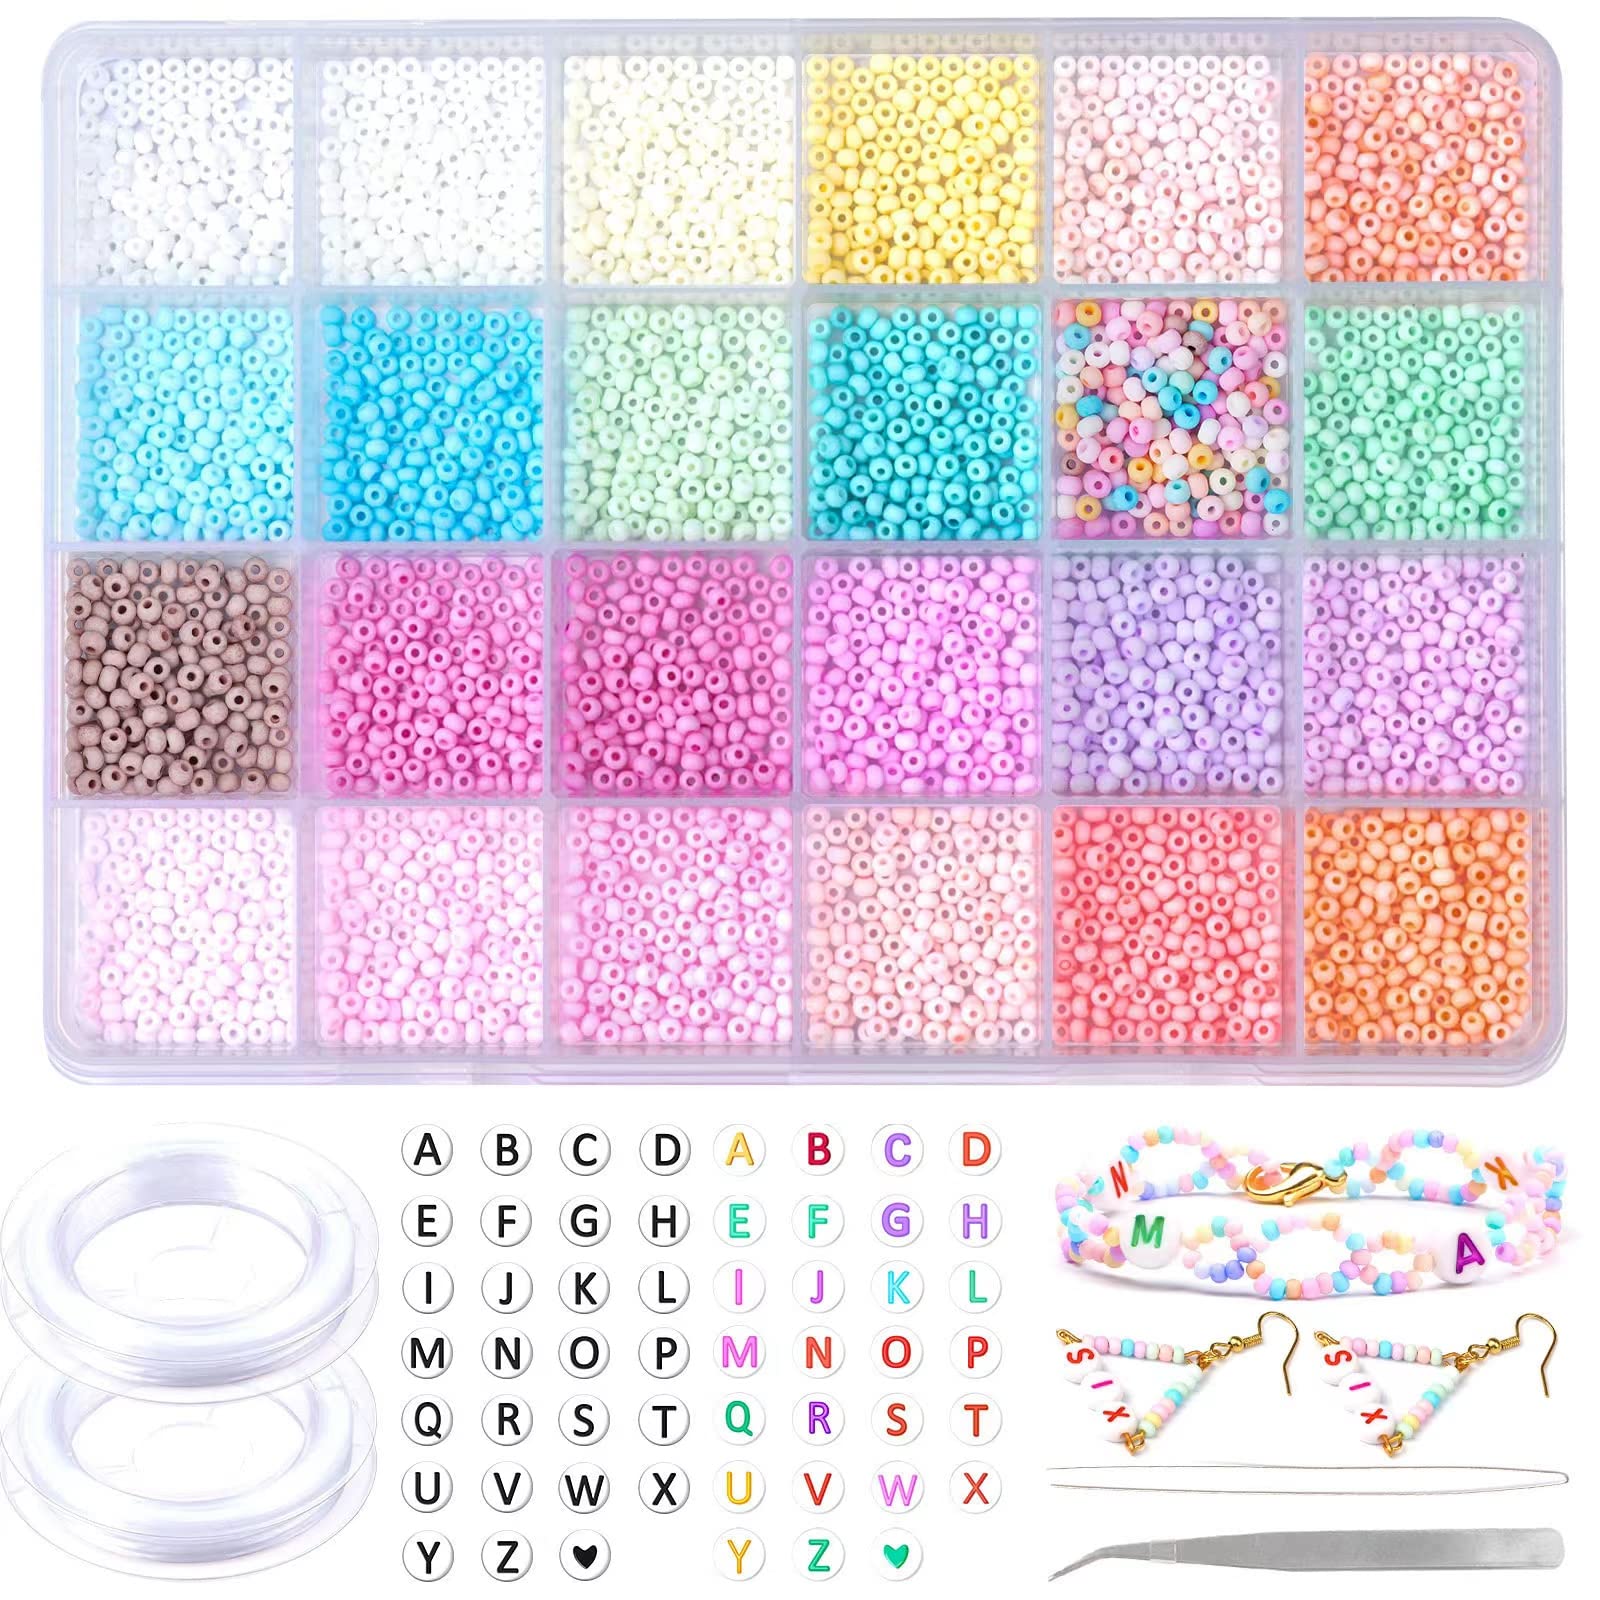  Rainbow Pony Beads for Jewelry Making, Pastel Round Beads for  Bracelet Making, Kandi Bracelets Kit with Colorful Letter Beads for Women  Girls Friendship Bracelets Making Kit , Hair Beads for Braids